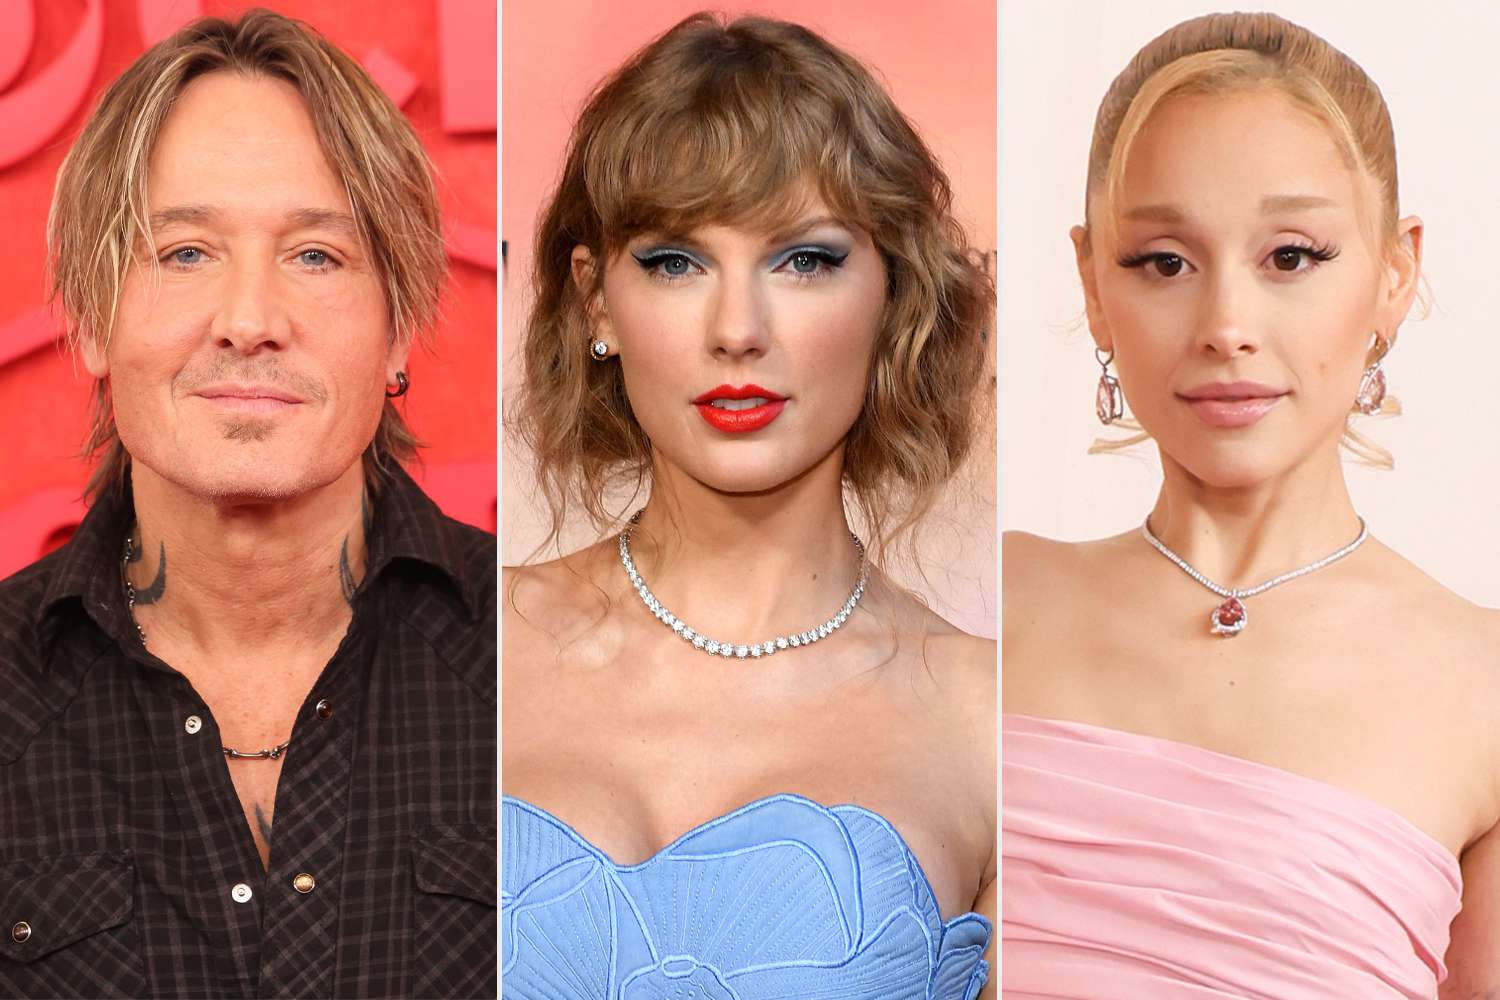 Keith Urban Dishes on 'Extraordinary' Taylor Swift and His Ariana Grande 'Obsession' (Exclusive)